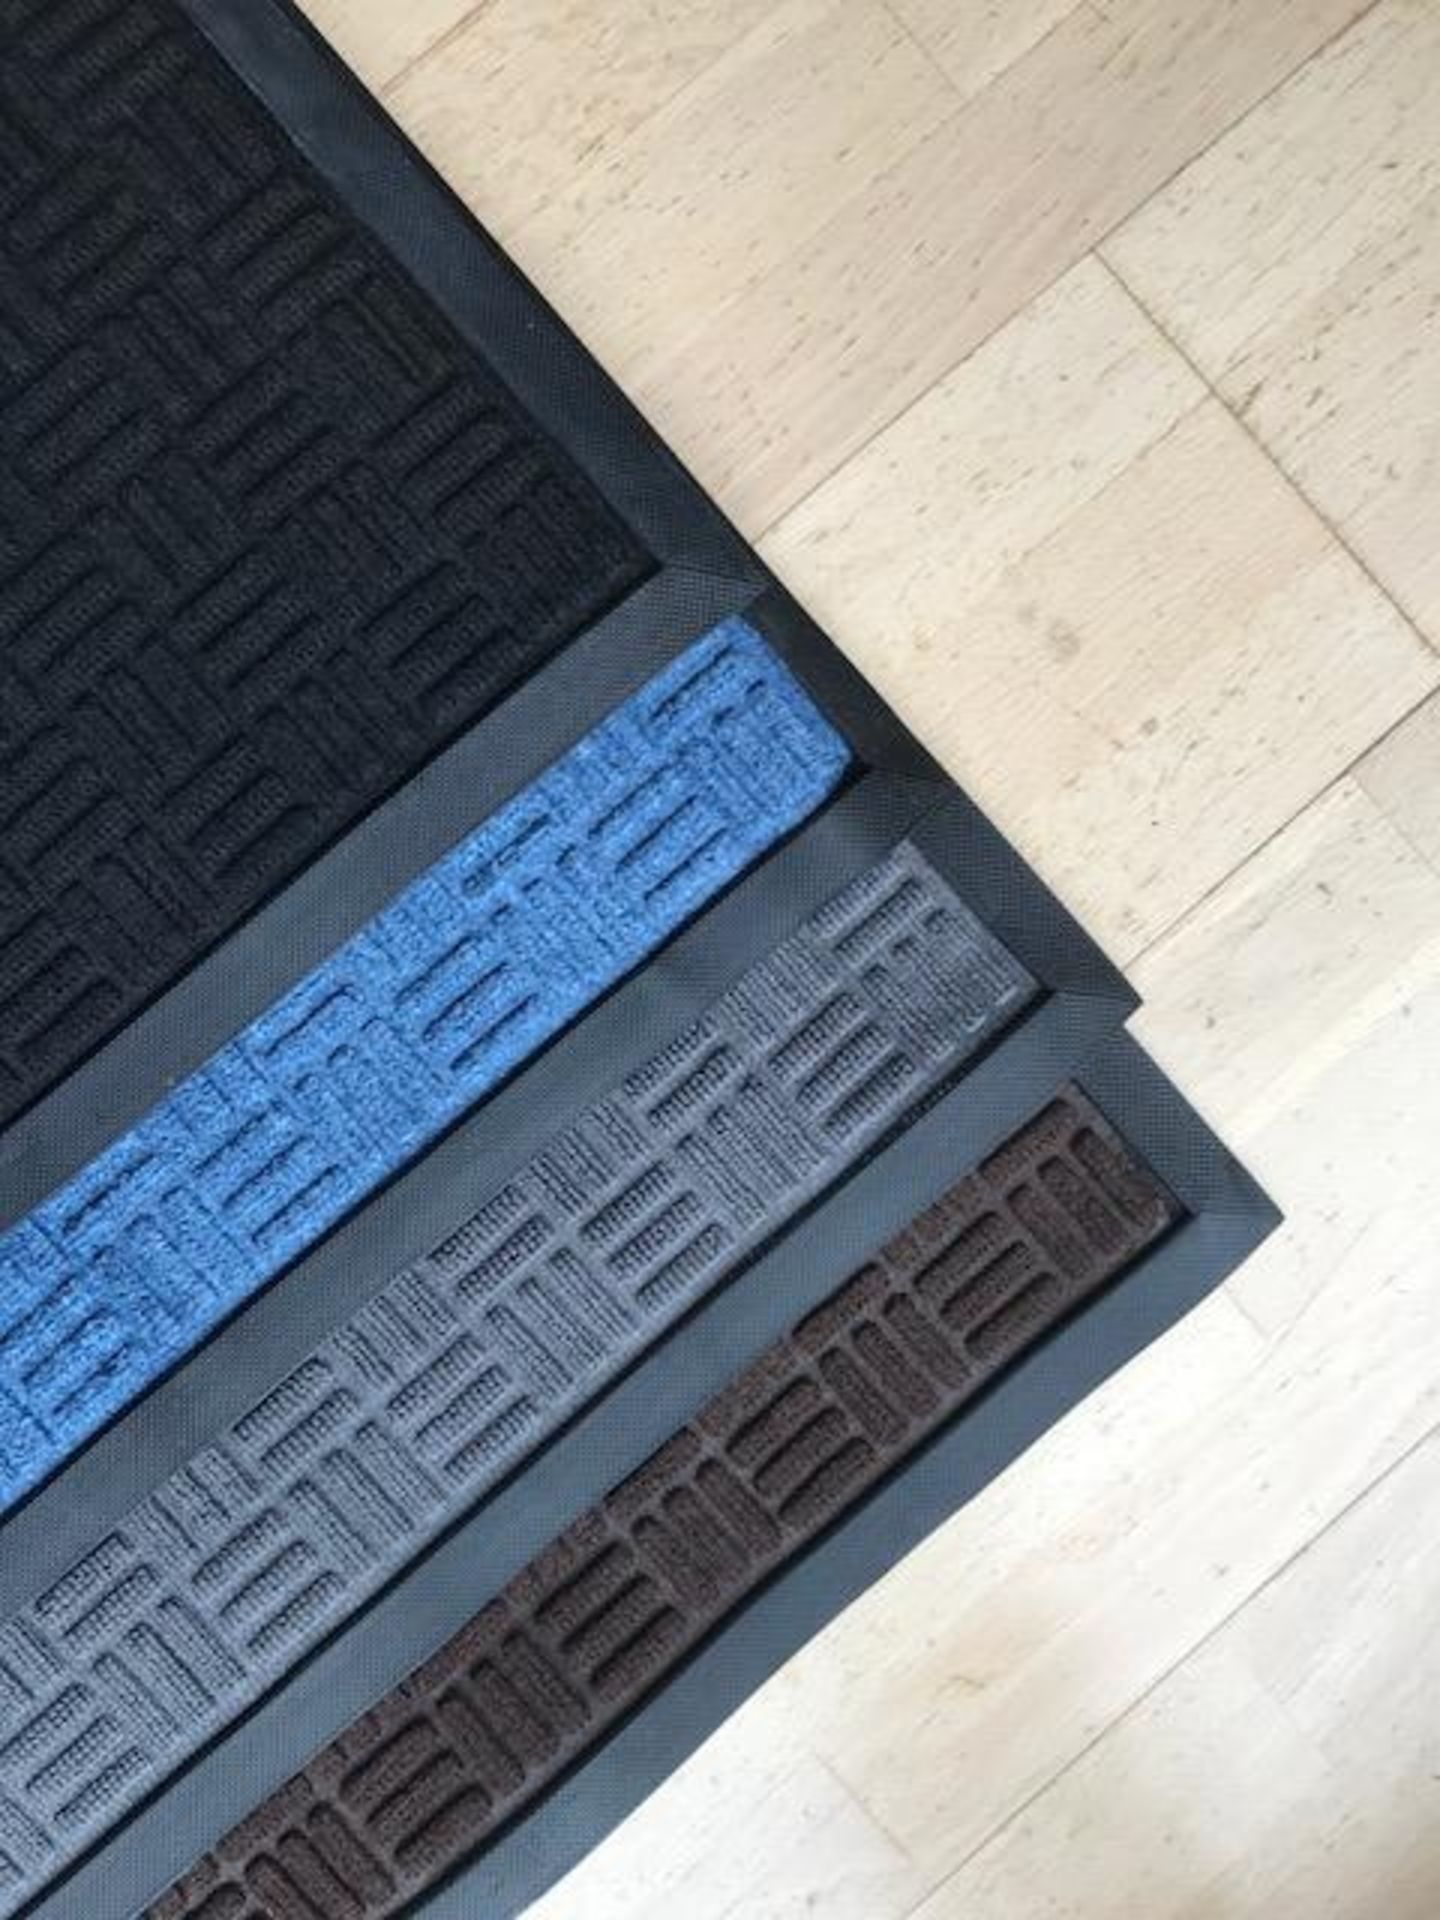 V Brand New Heavy Duty Blue Entrance Mat - Also For Residential Use - Approx 6ft X 4ft - Non Slip - Image 3 of 3